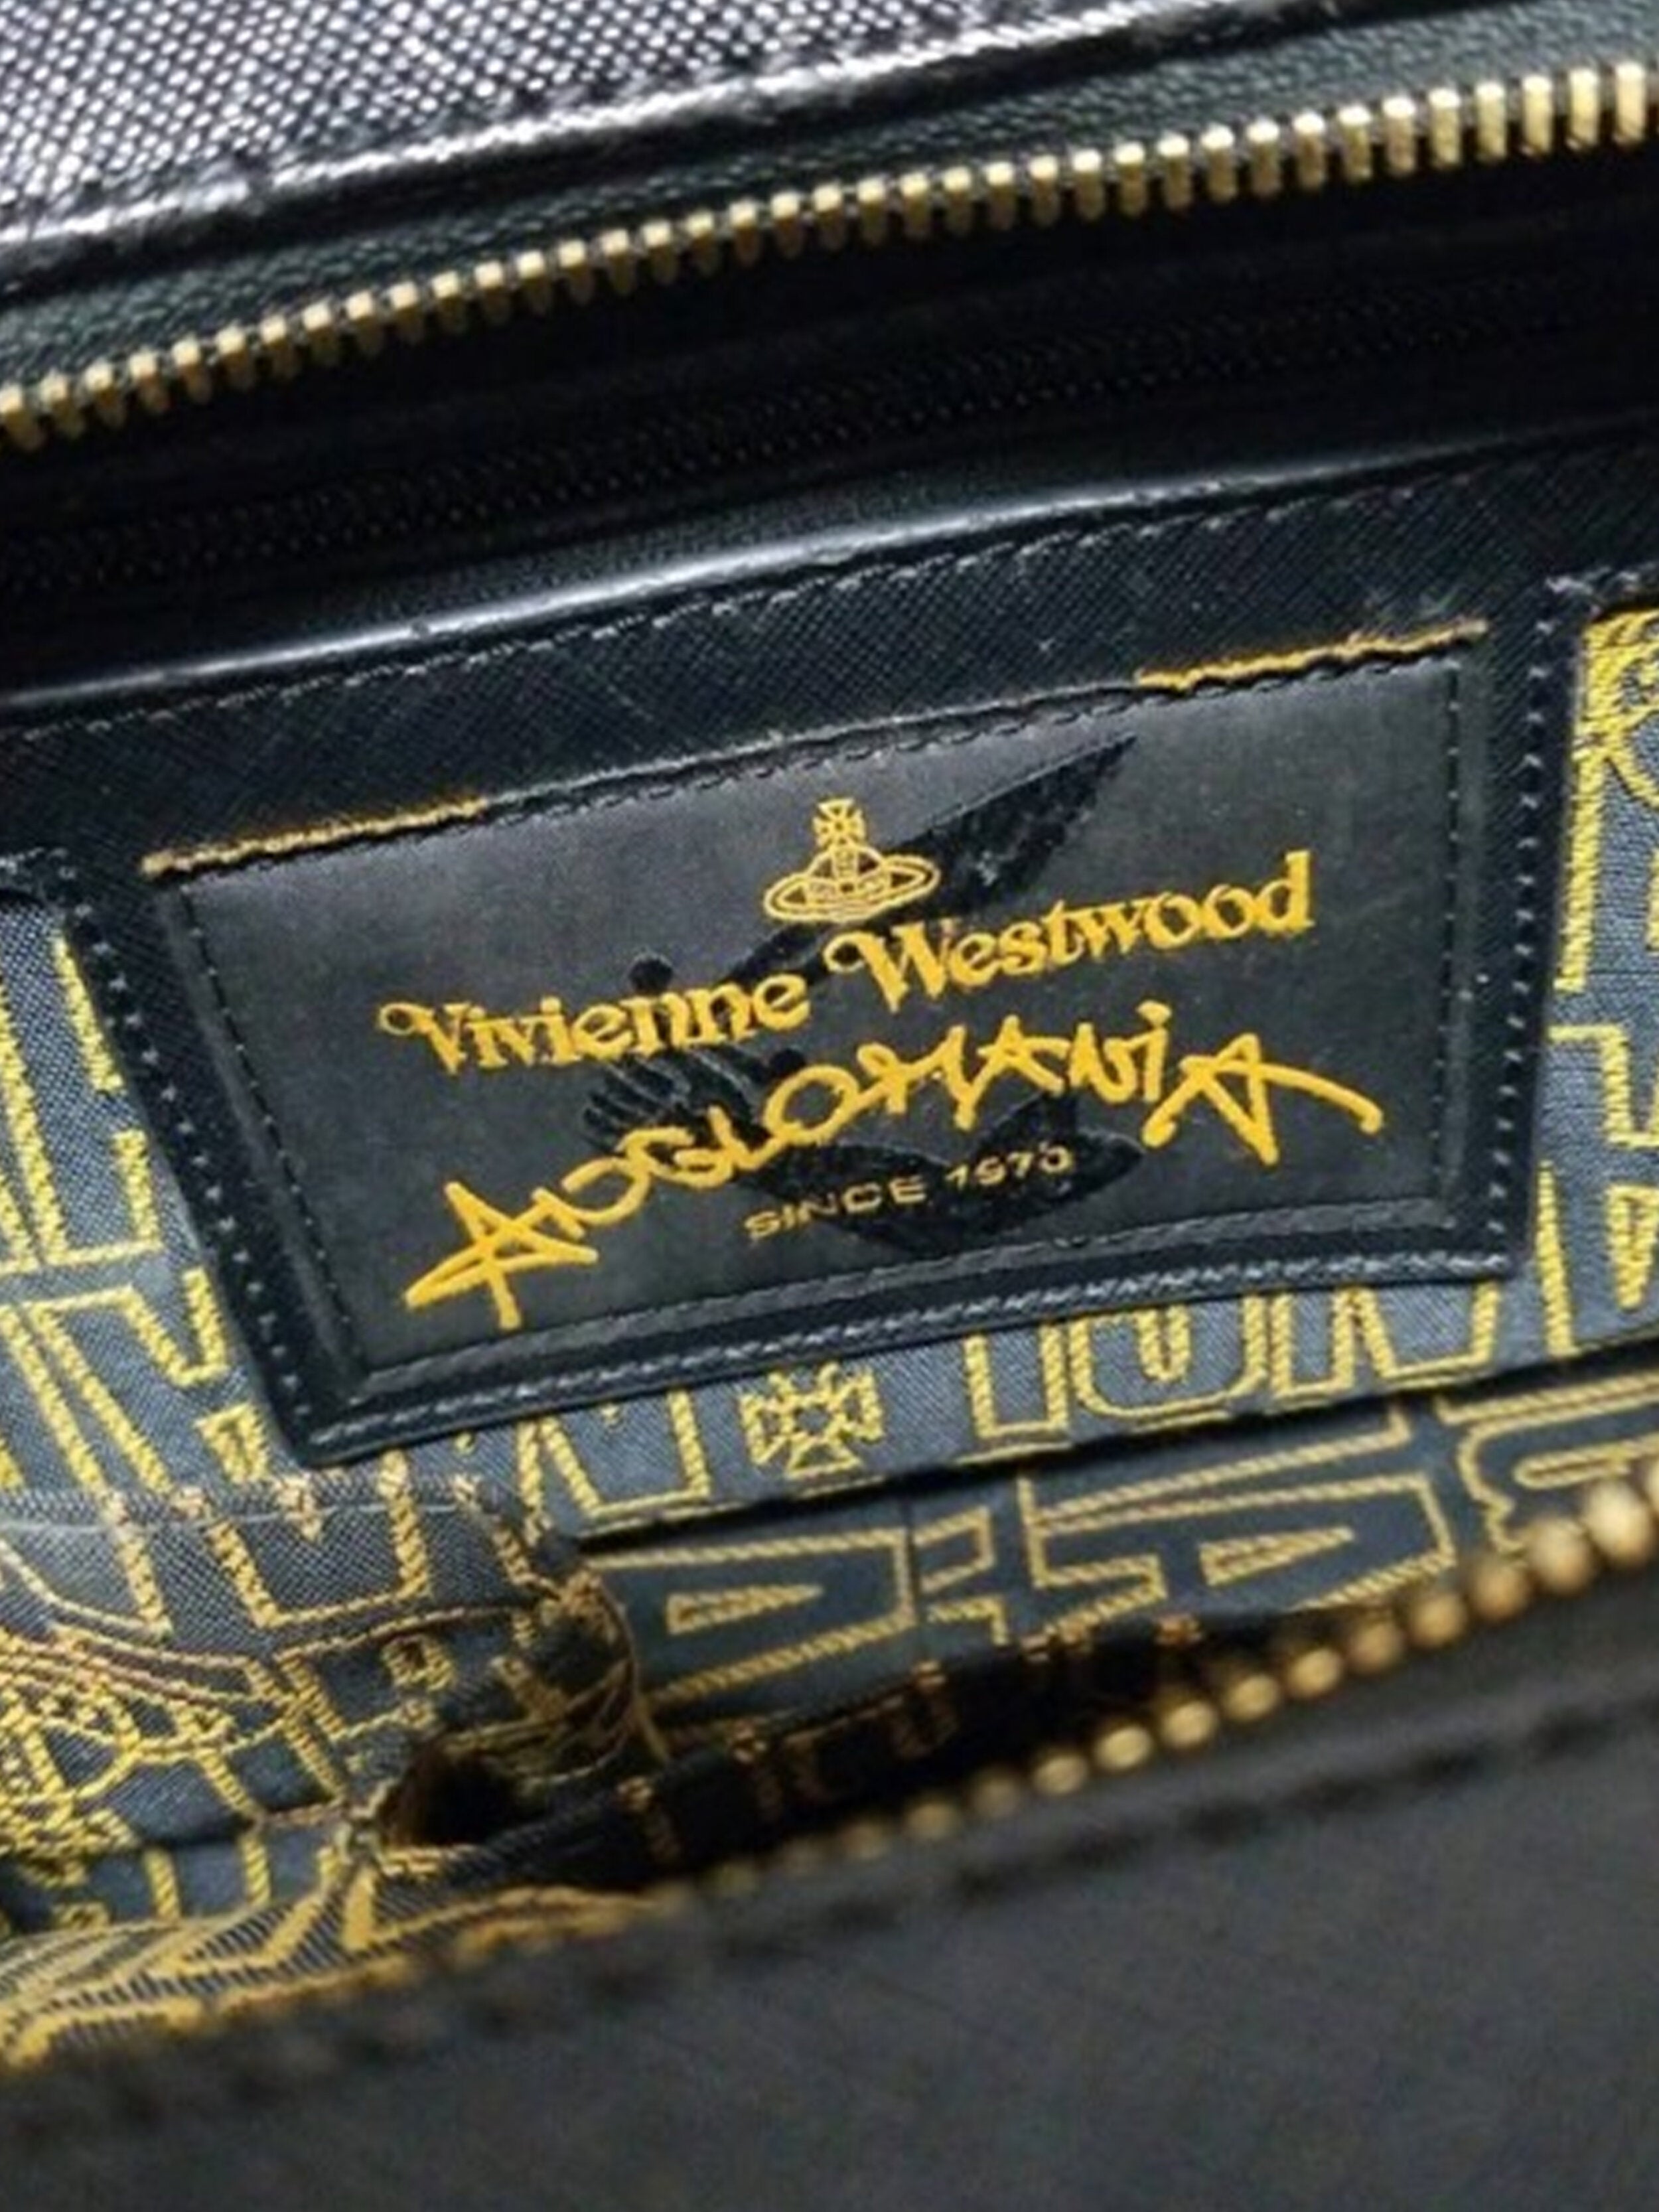 Vivienne Westwood 2000s Gold and Black Leather Bag